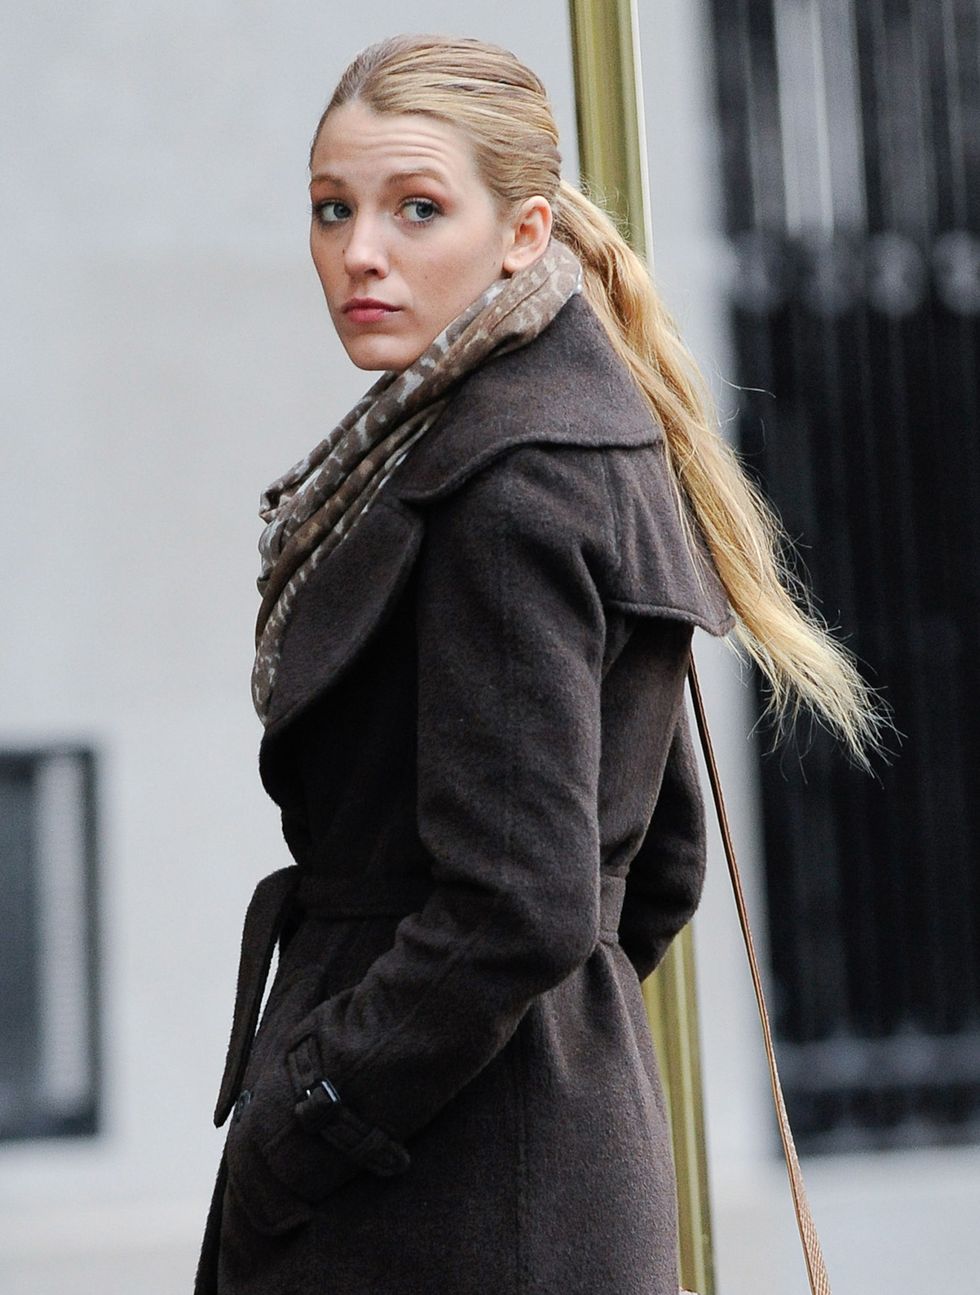 NEW YORK - NOVEMBER 30:  Actress Blake Lively films a scene for "Gossip Girl" on November 30, 2010 in New York City.  (Photo by Ray Tamarra/Getty Images)